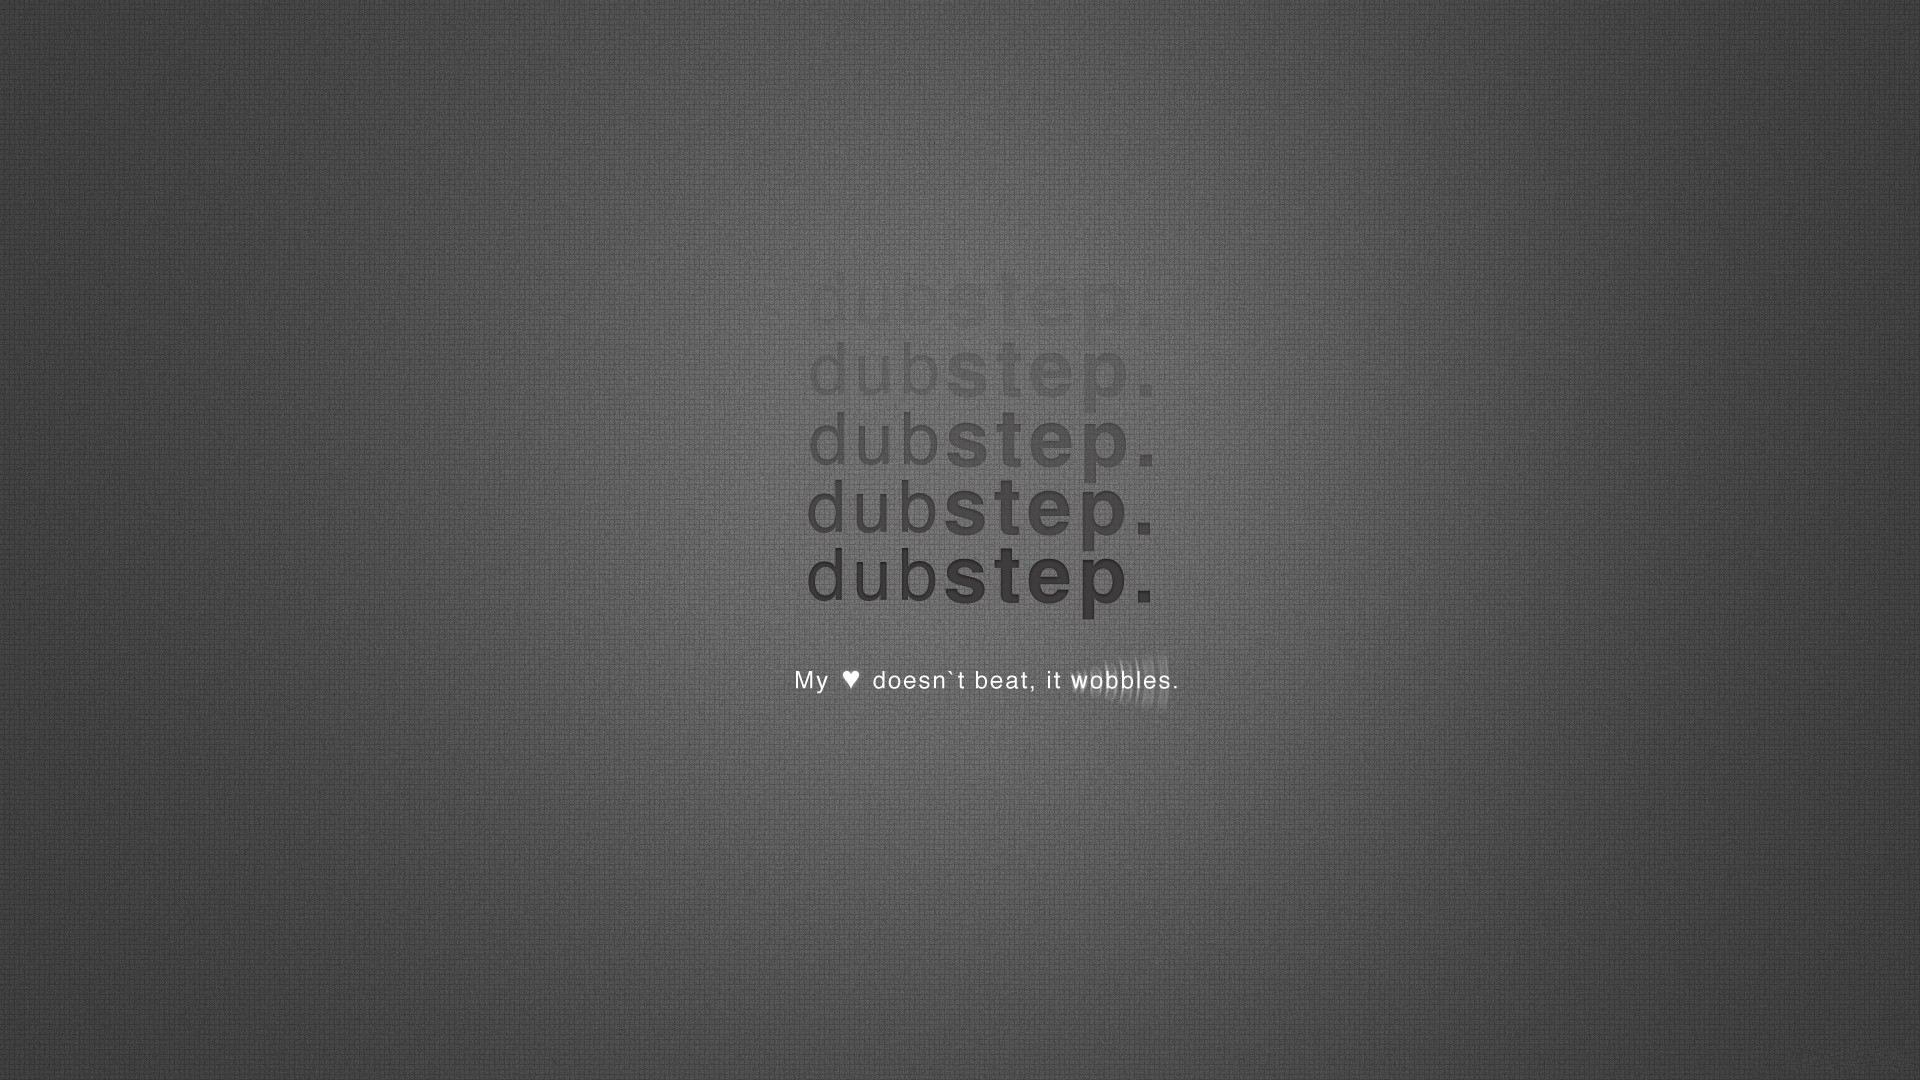 General 1920x1080 minimalism gray dubstep artwork electronic music music simple background monochrome gray background